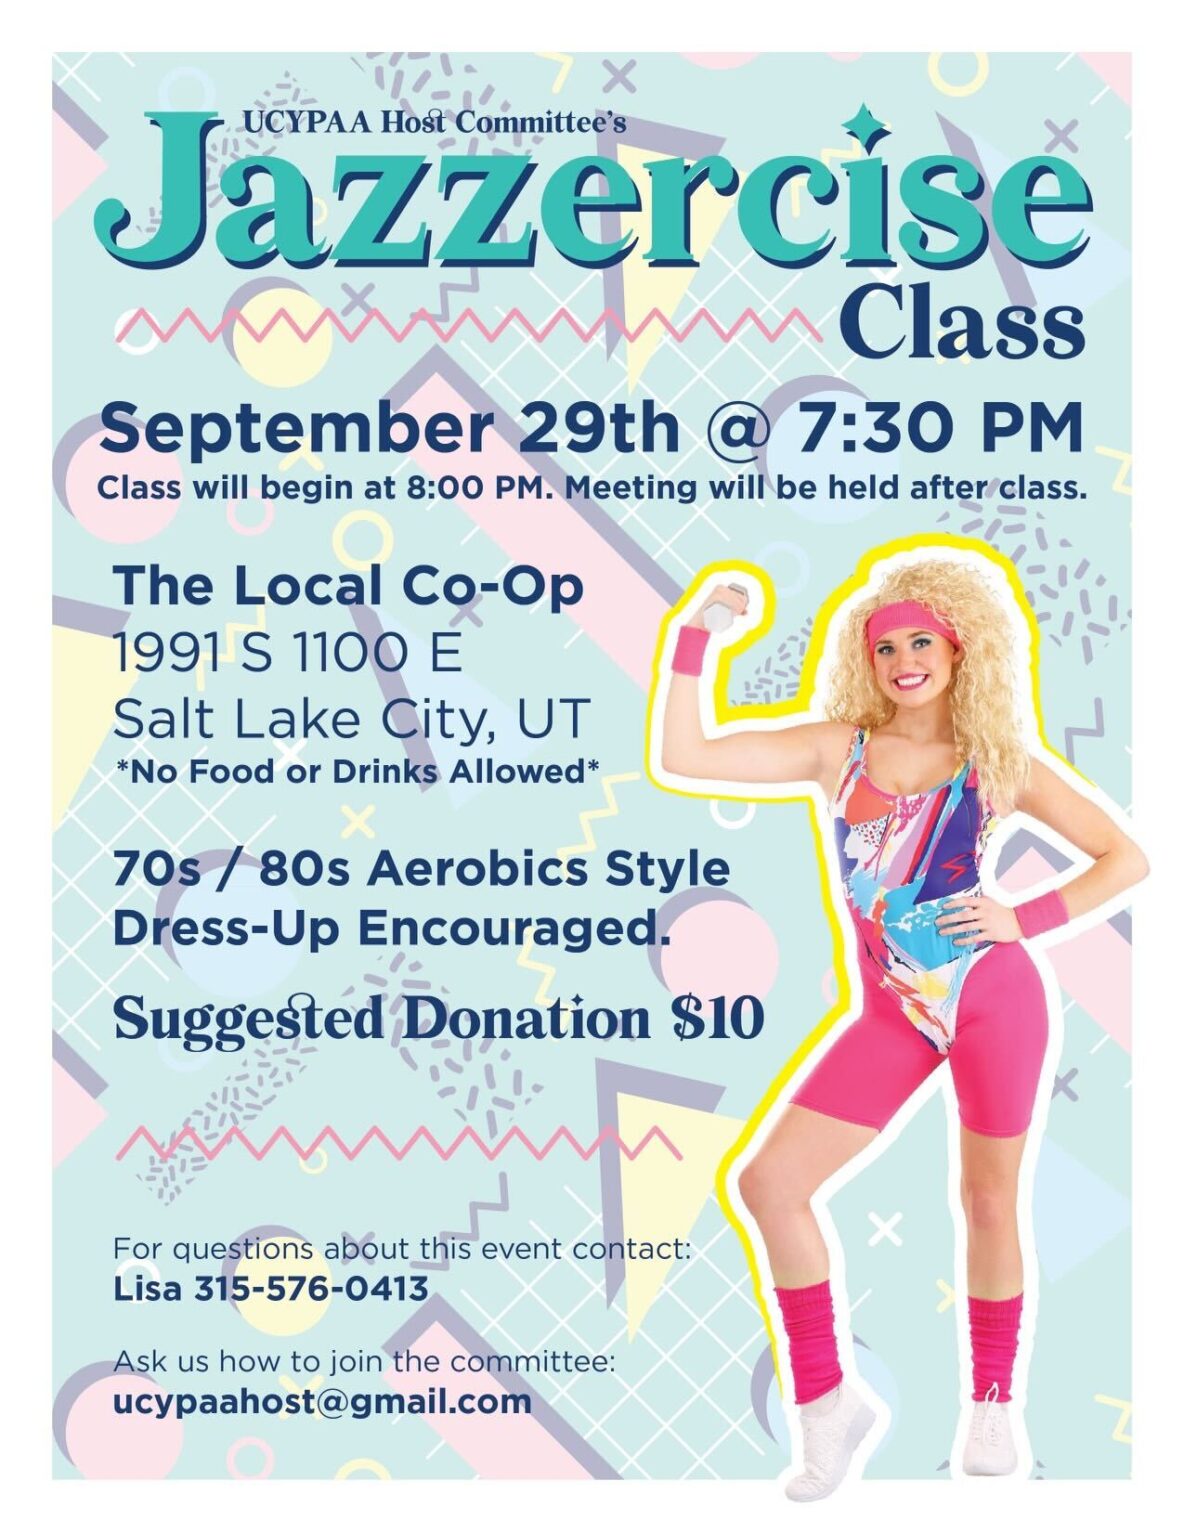 UCYPAA Jazzercise Class  AA Central Office of Salt Lake